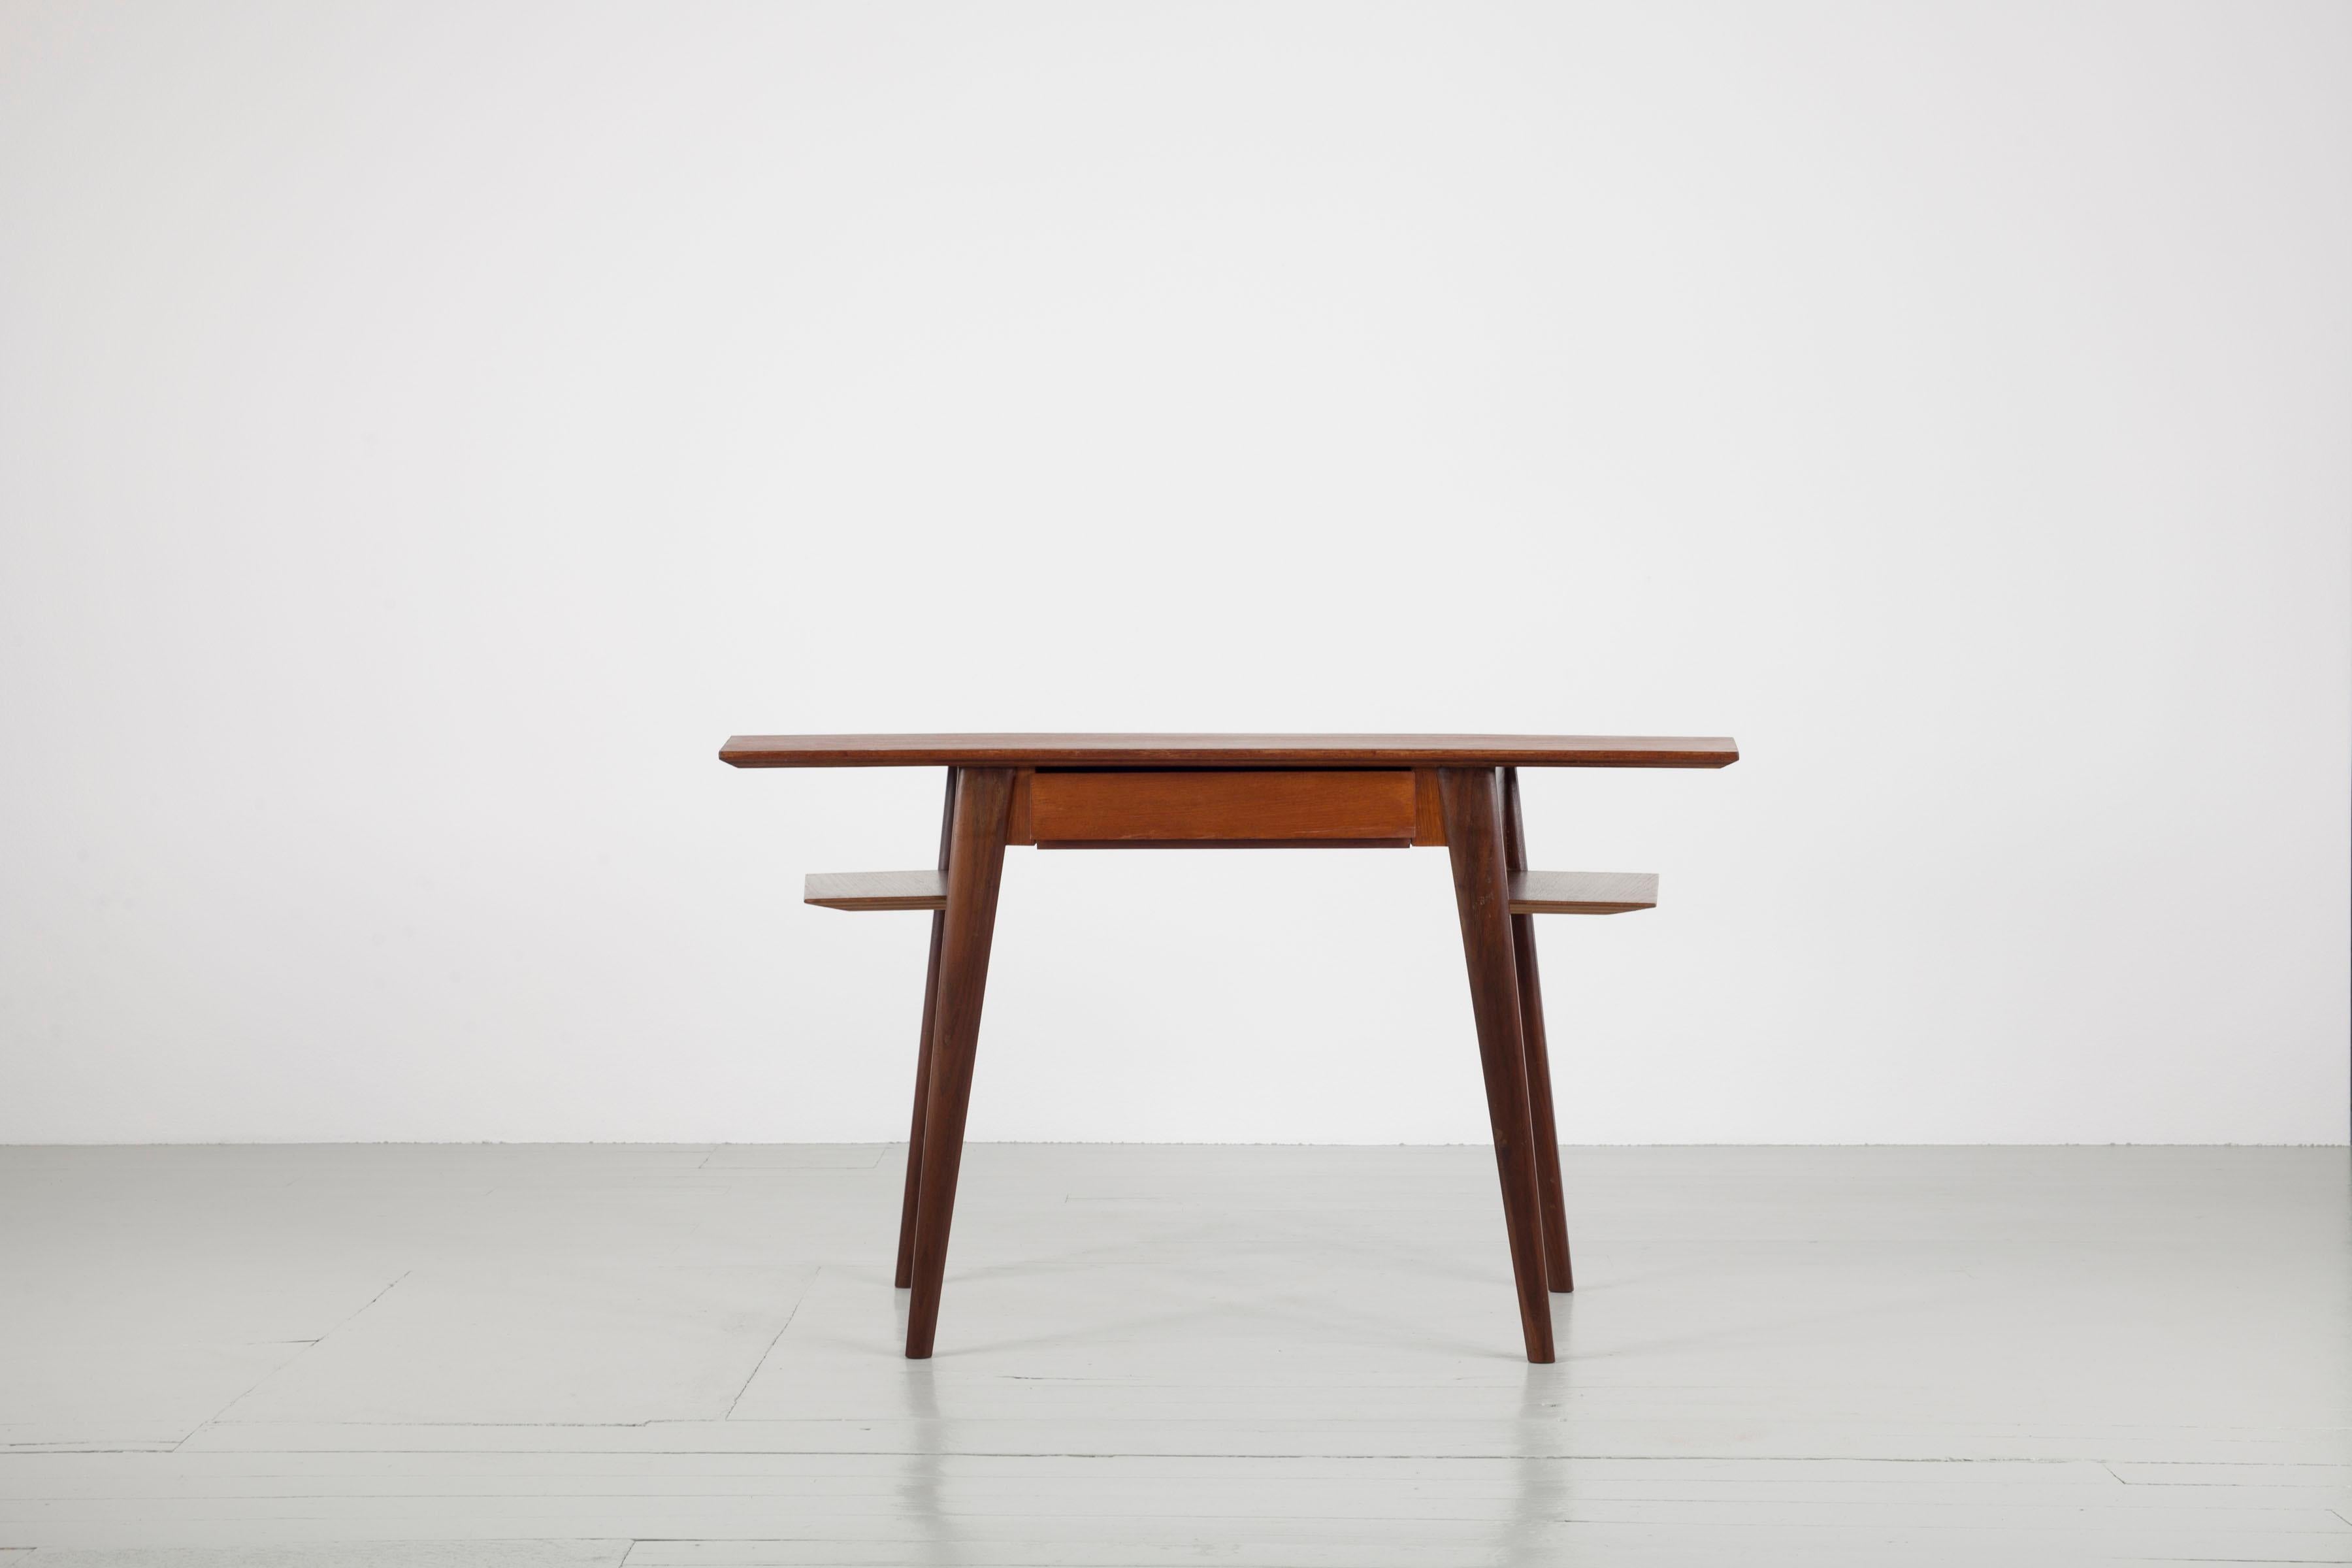 Writing desk, design by Silvio Cavatorta, Italy, 1960s. The teak desk has a shelf on either side and a drawer underneath the asymmetric table top.
The desk is beautiful on all sides - can be positioned also in the middle of the room.